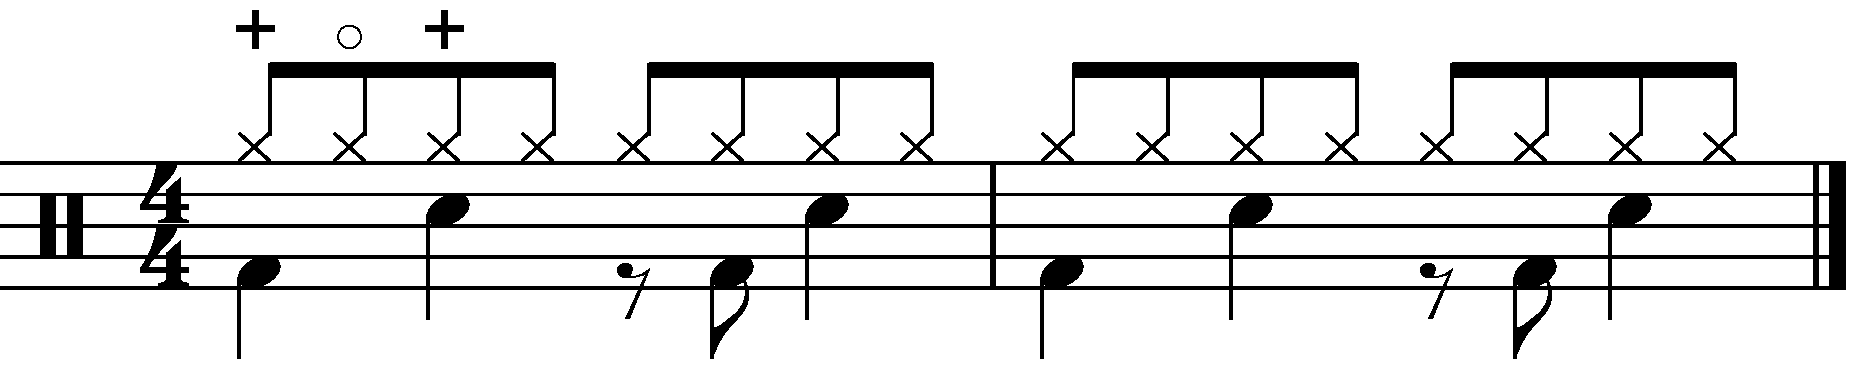 The Hi Hat Part for example 2 with groove added in